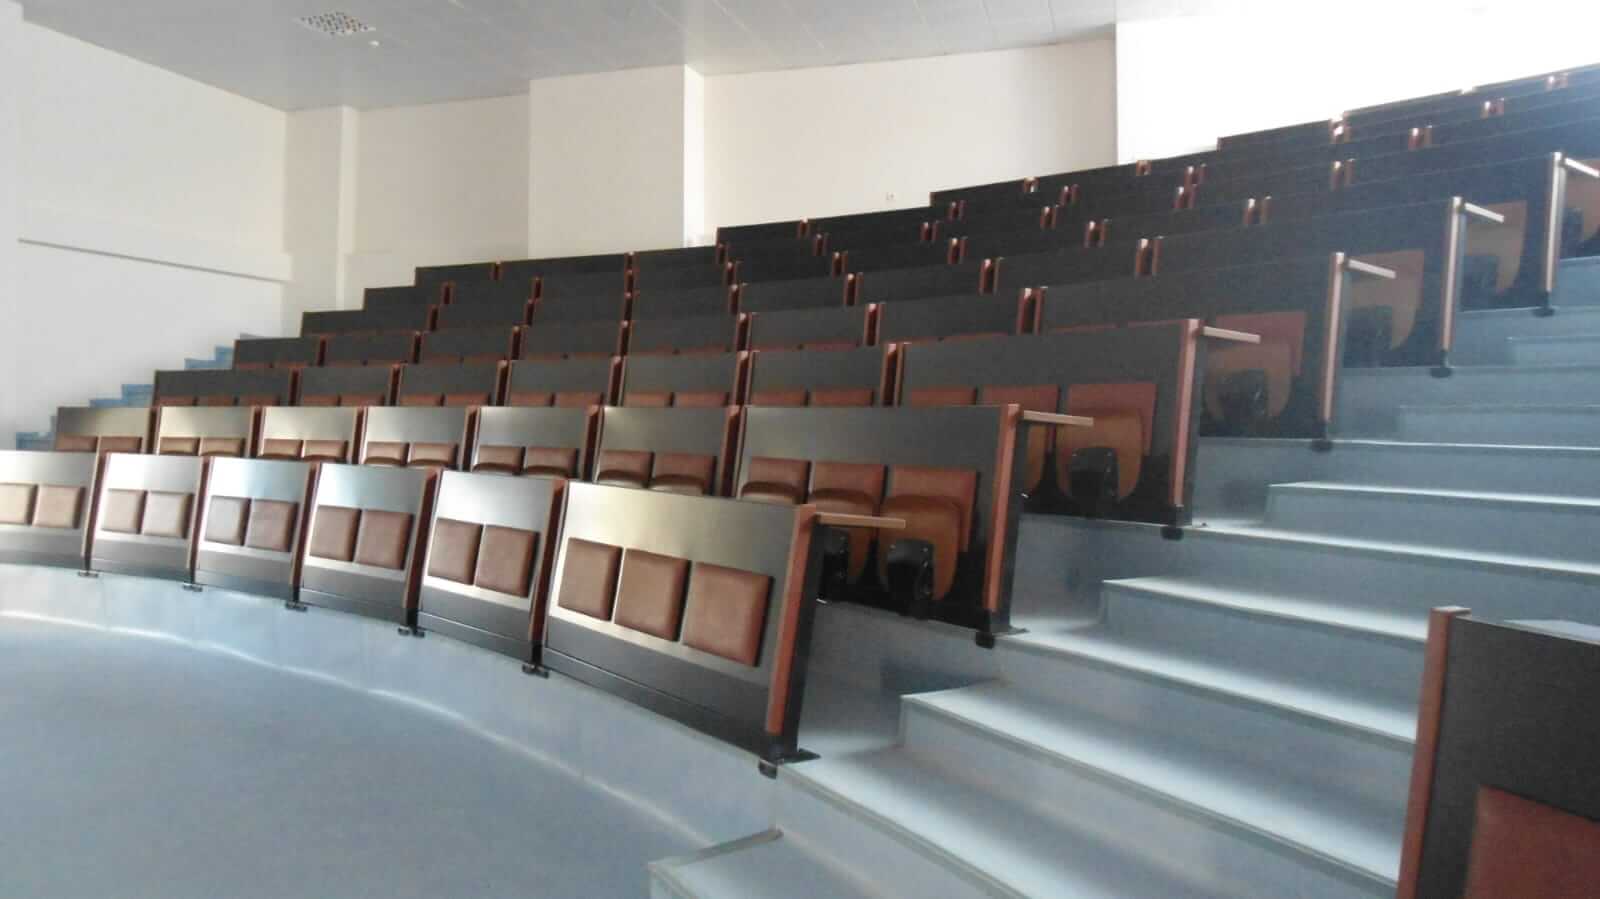 Lecture Seating Projects - Monseat Image